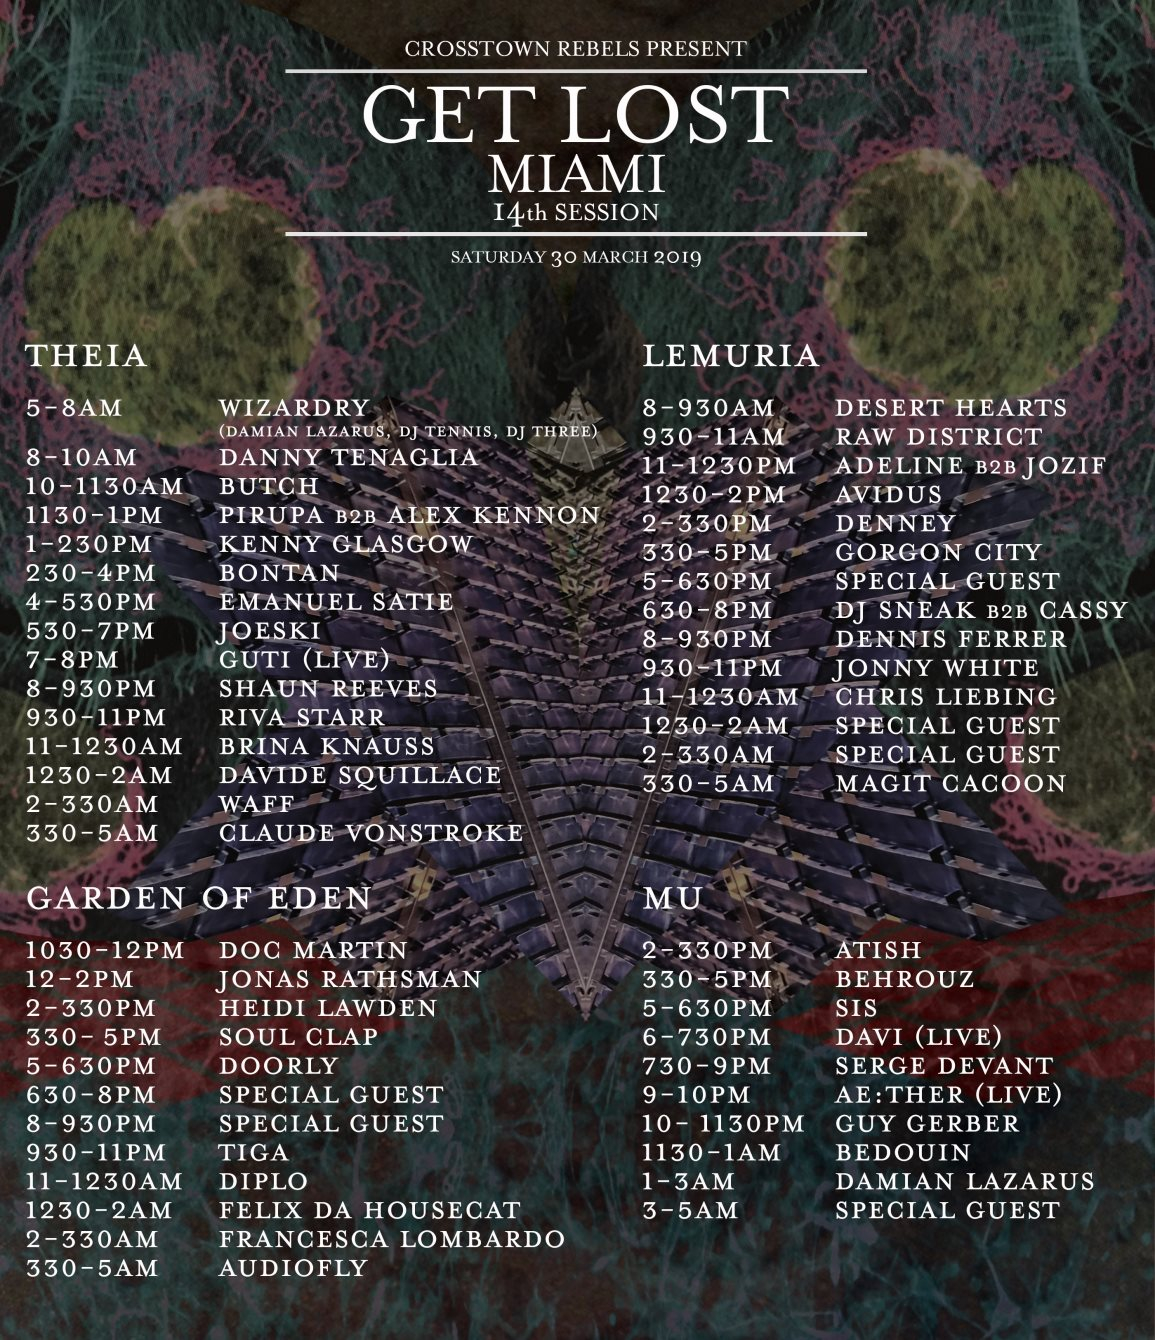 Get Lost Miami 2019 - 14th Session - Flyer front